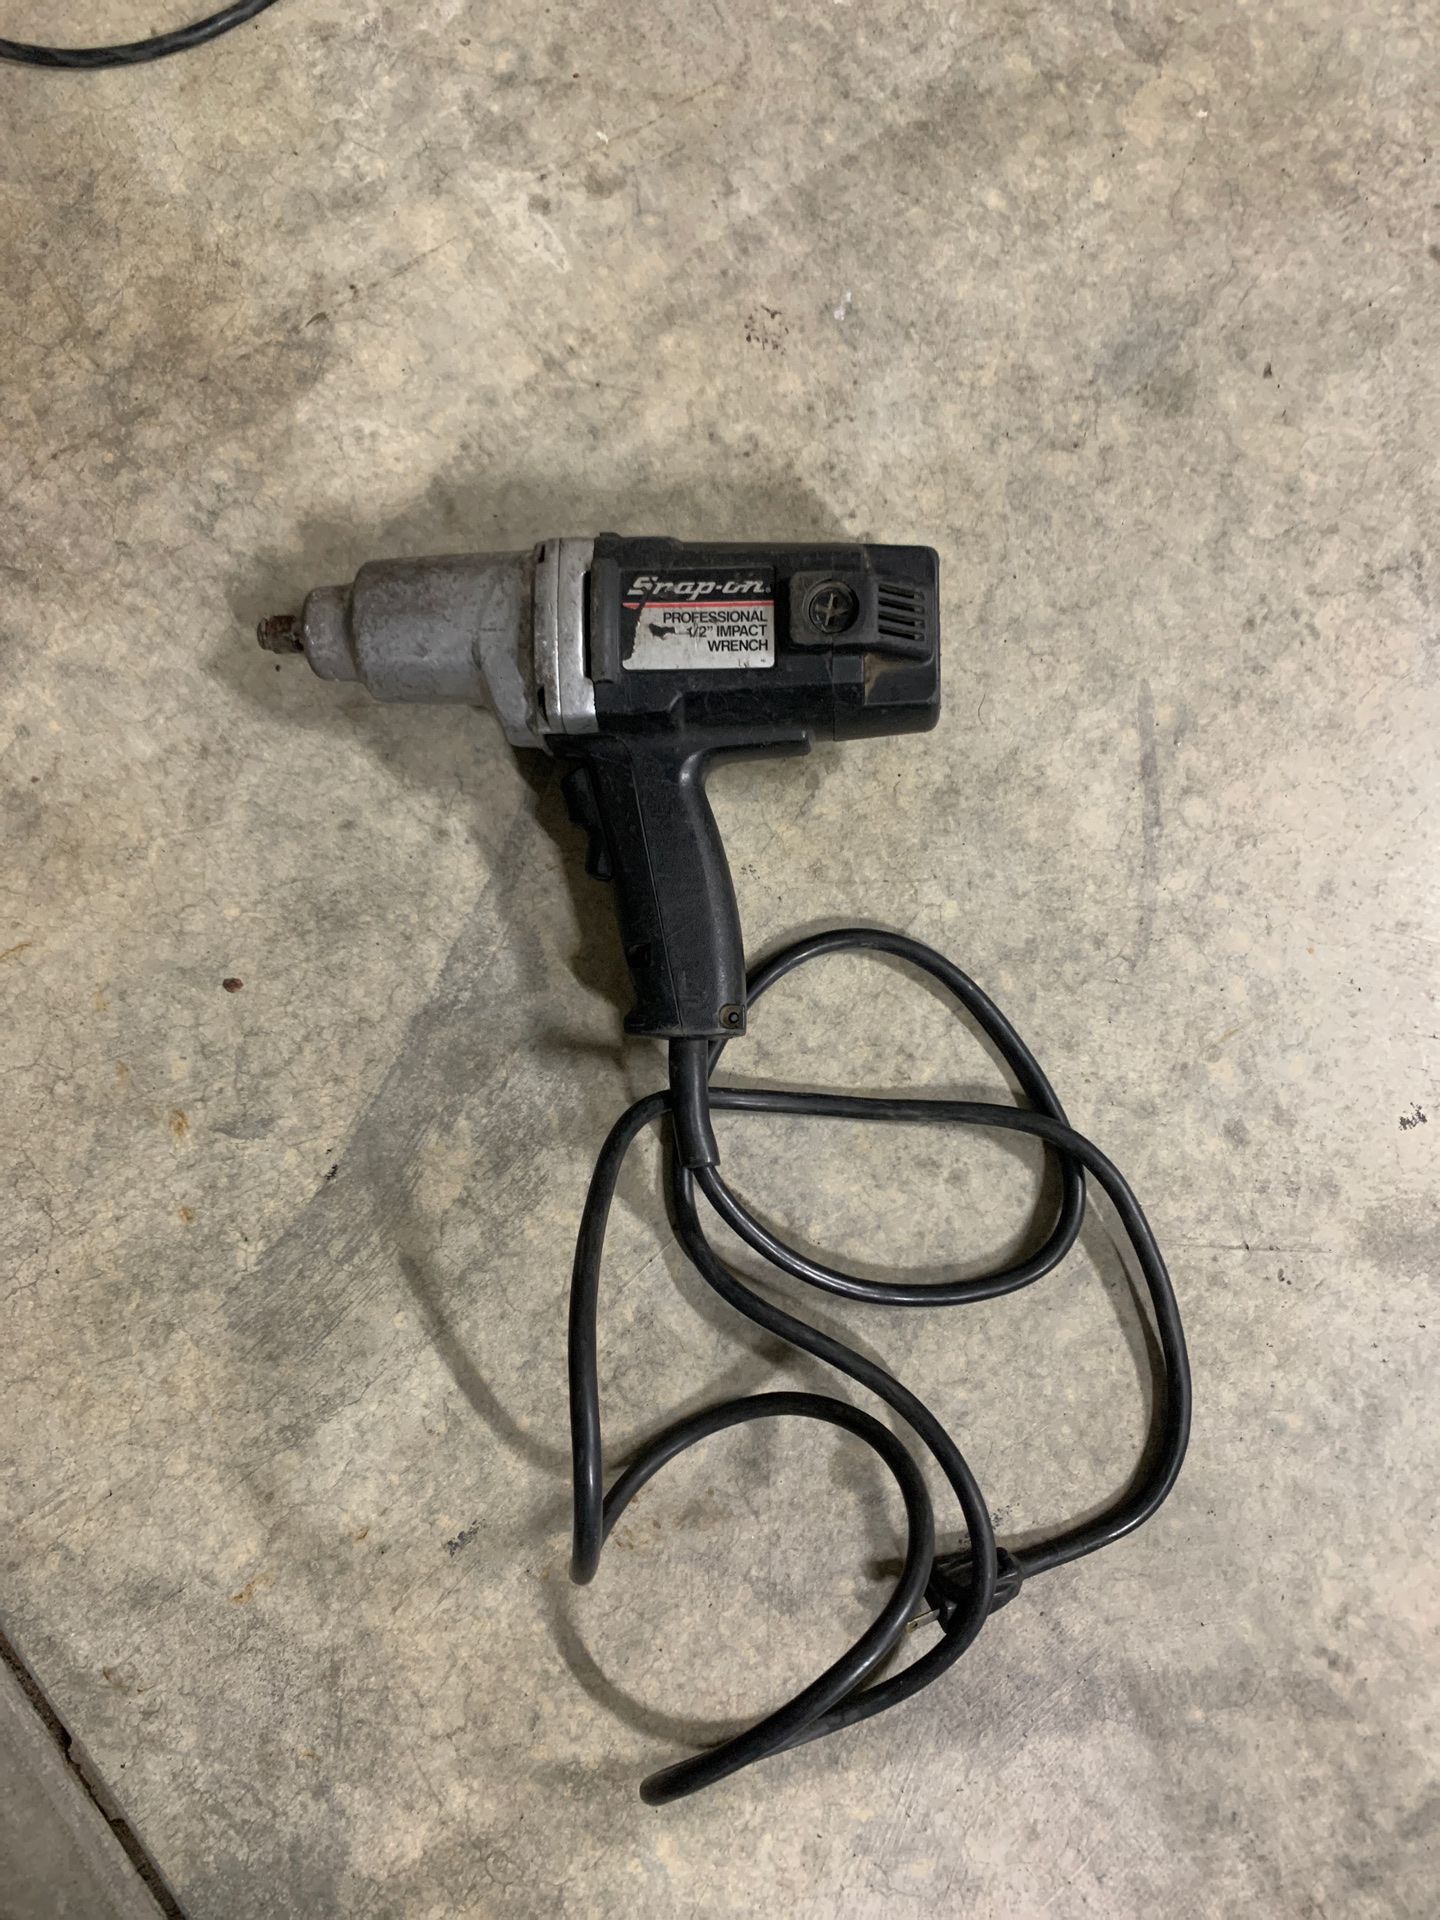 Snap on corded impact